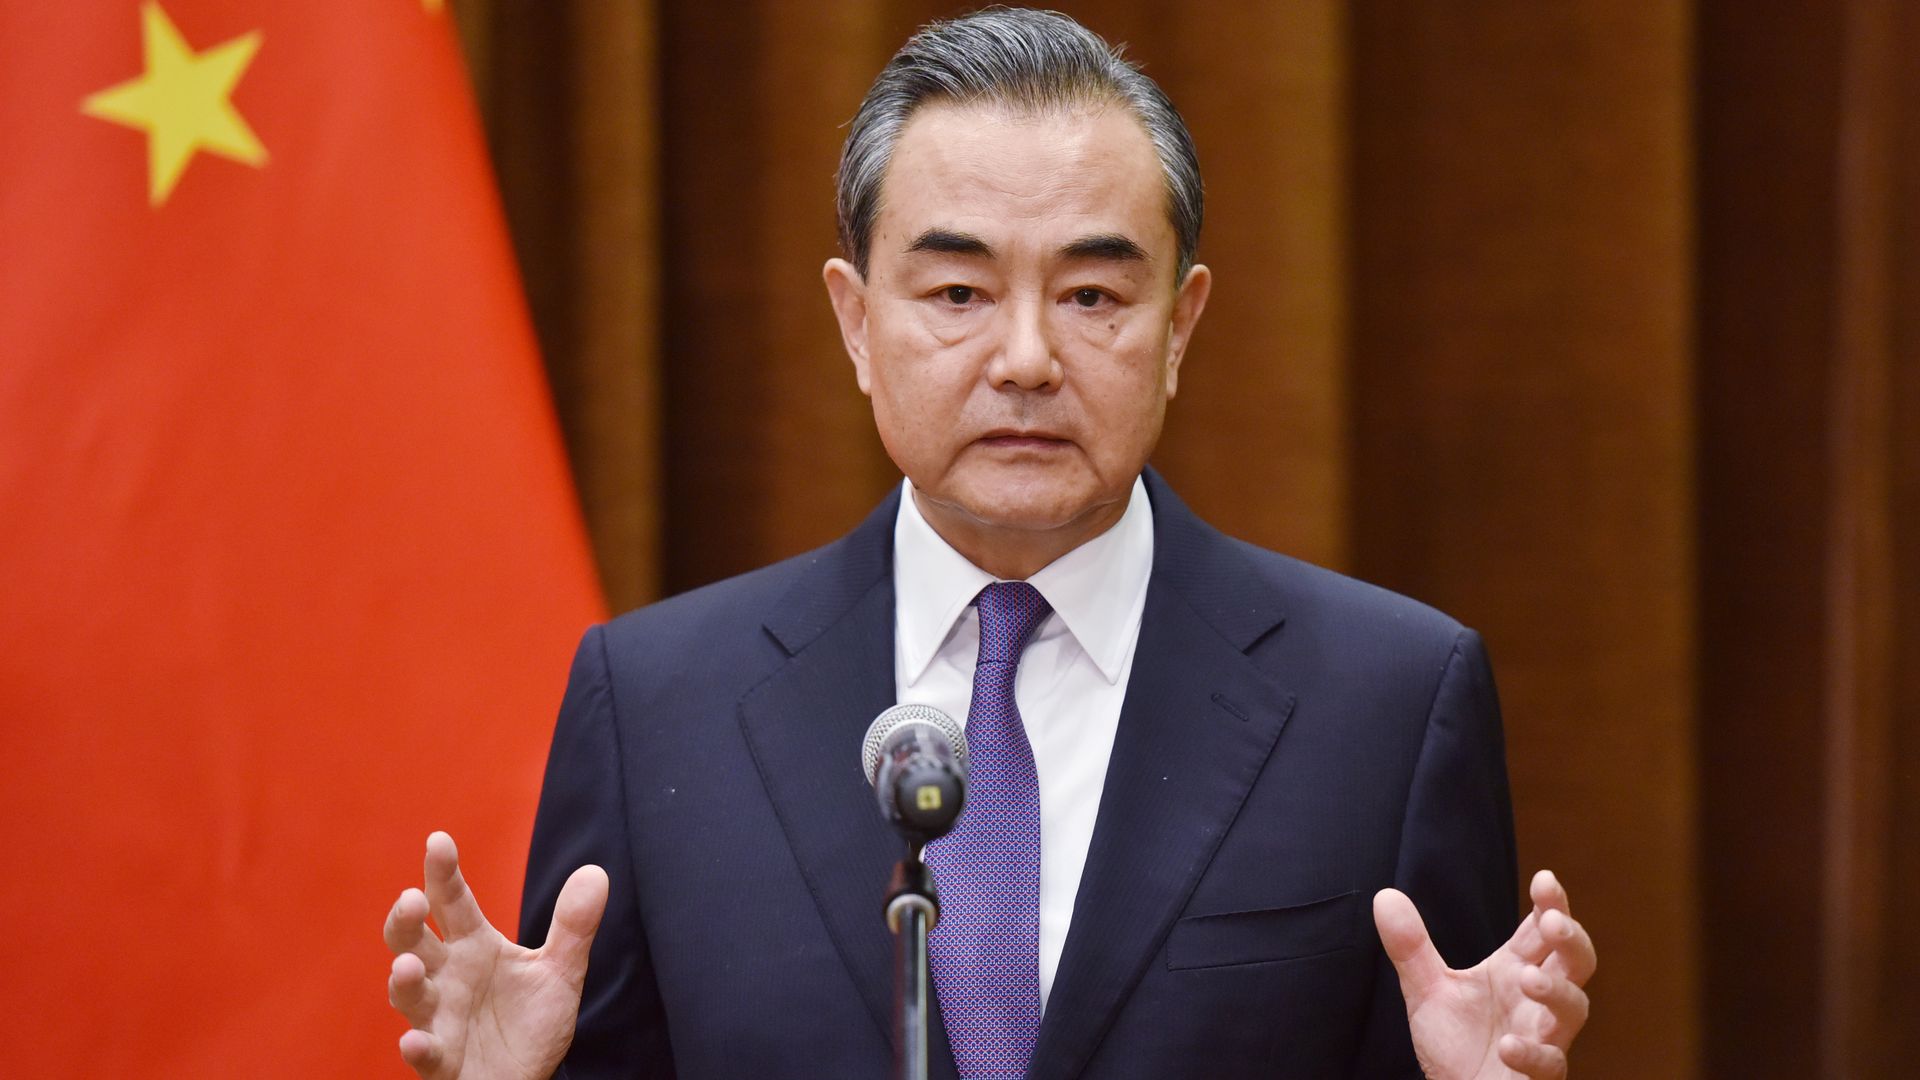 Chinese foreign minister giving a speech.